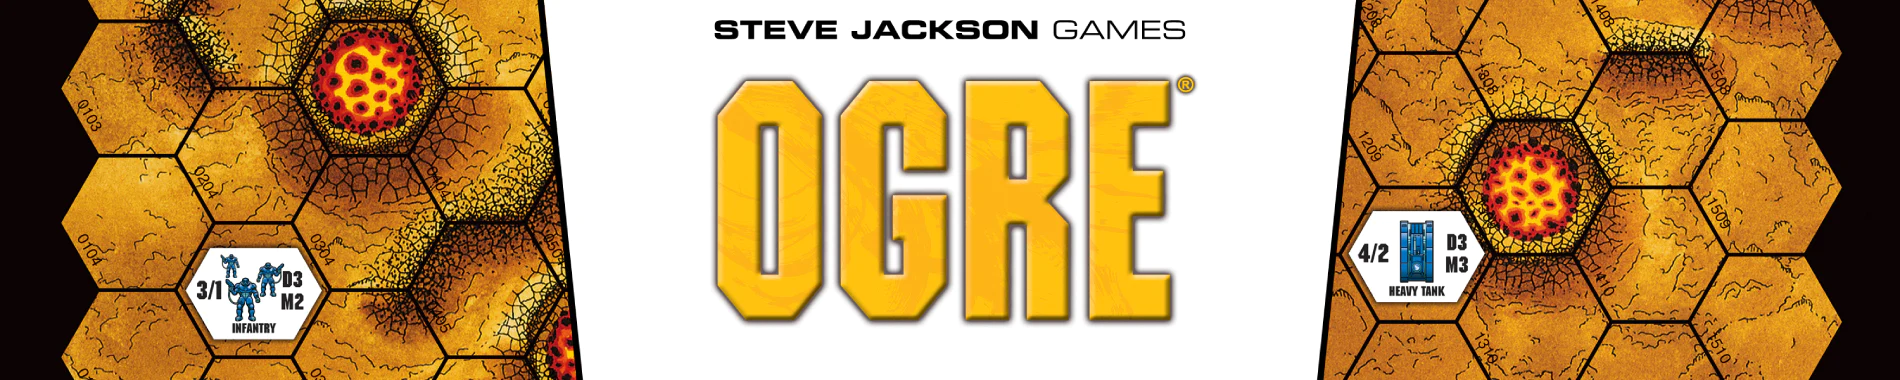 Ogre collection banner